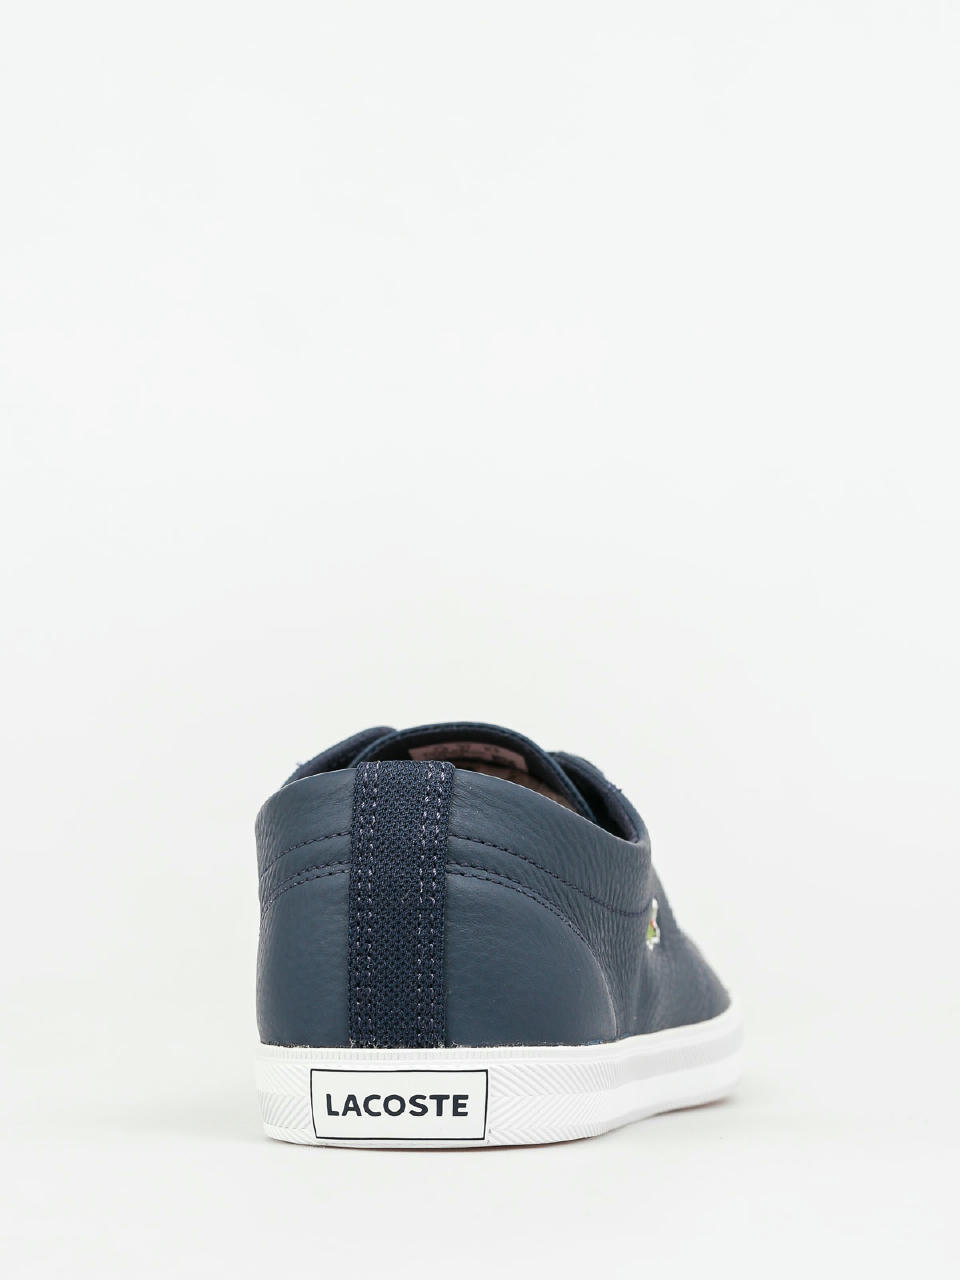 Lacoste Lcr3 Spm leather)